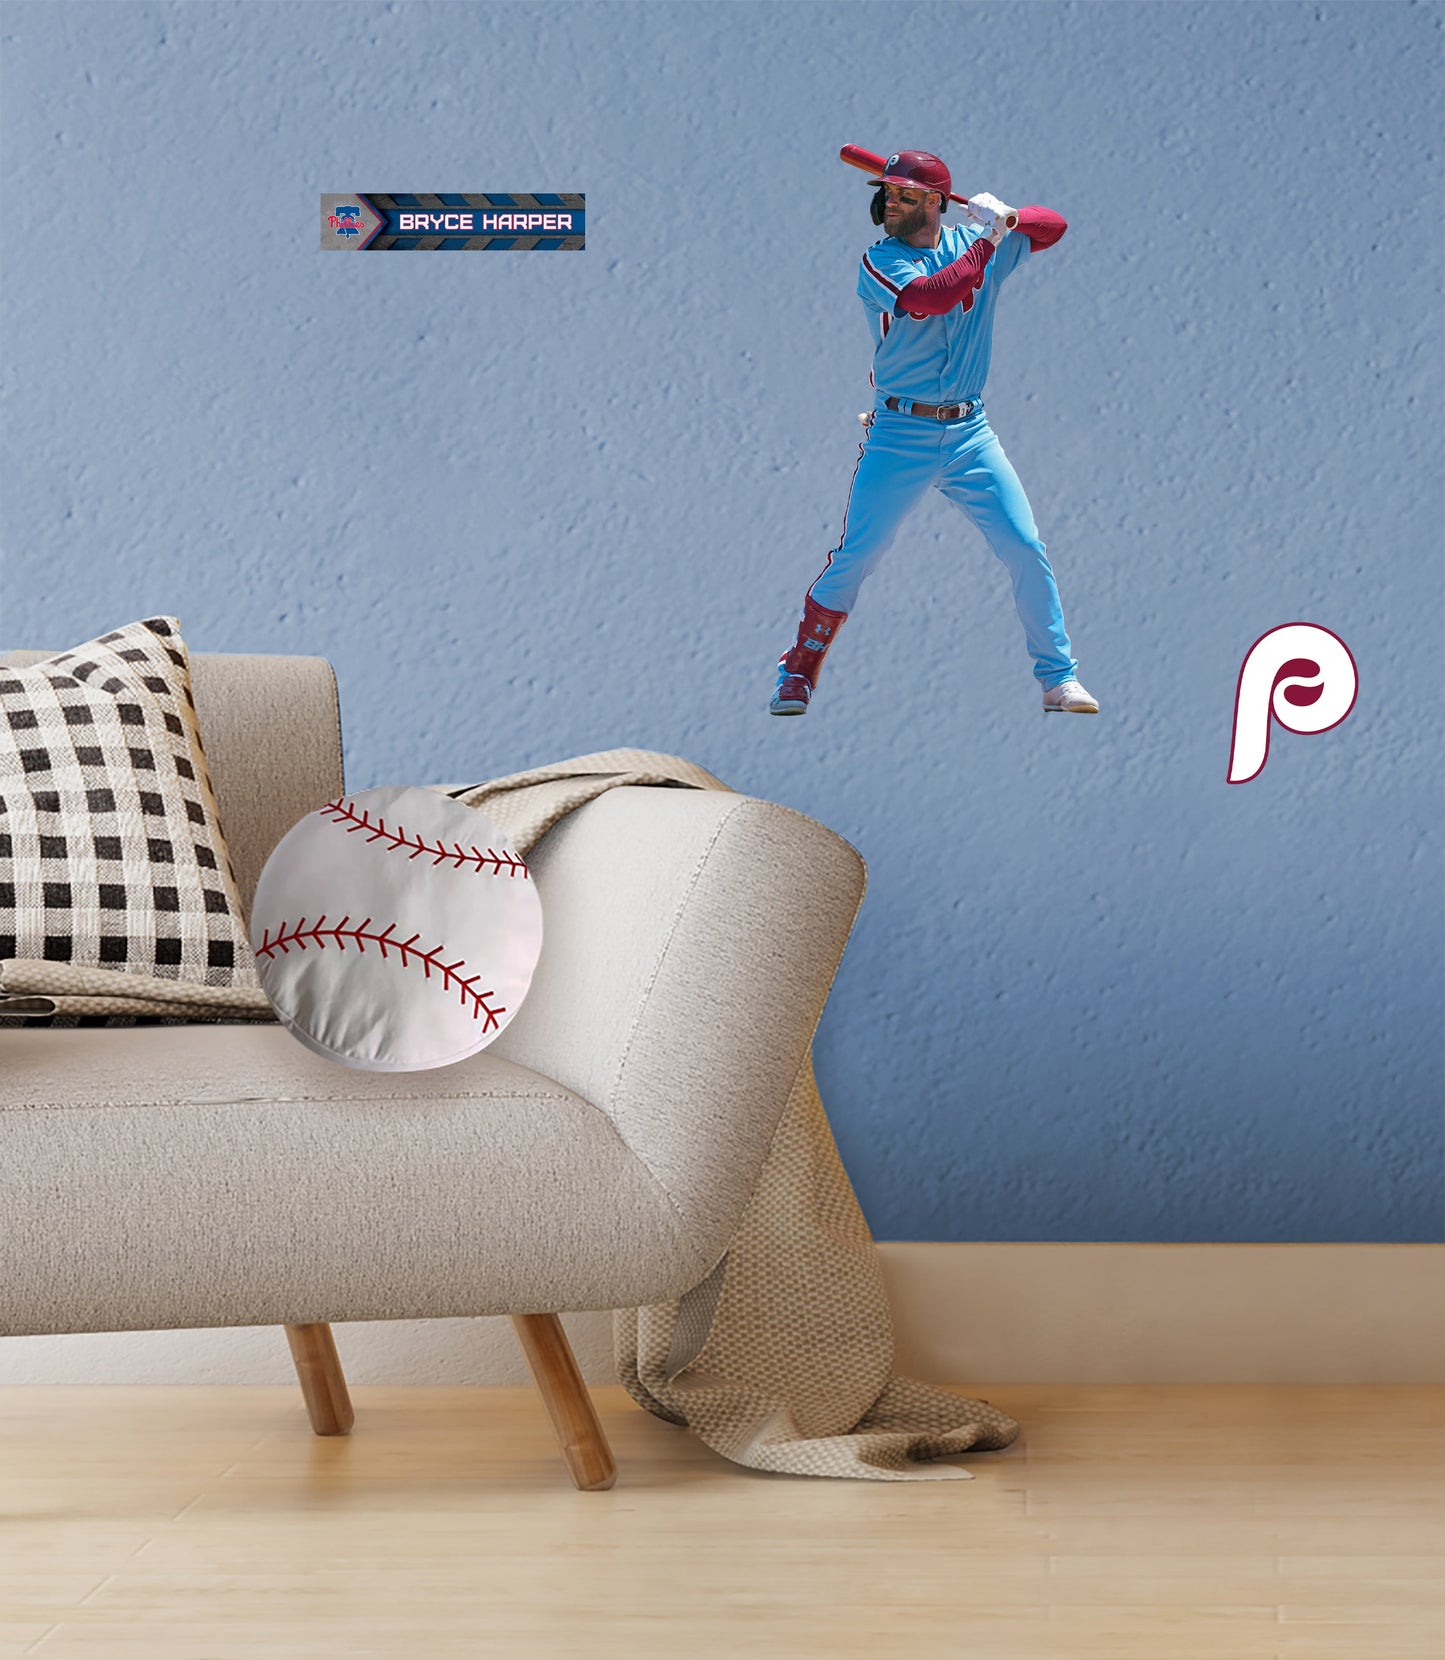 Philadelphia Phillies: Bryce Harper Throwback - Officially Licensed MLB Removable Adhesive Decal